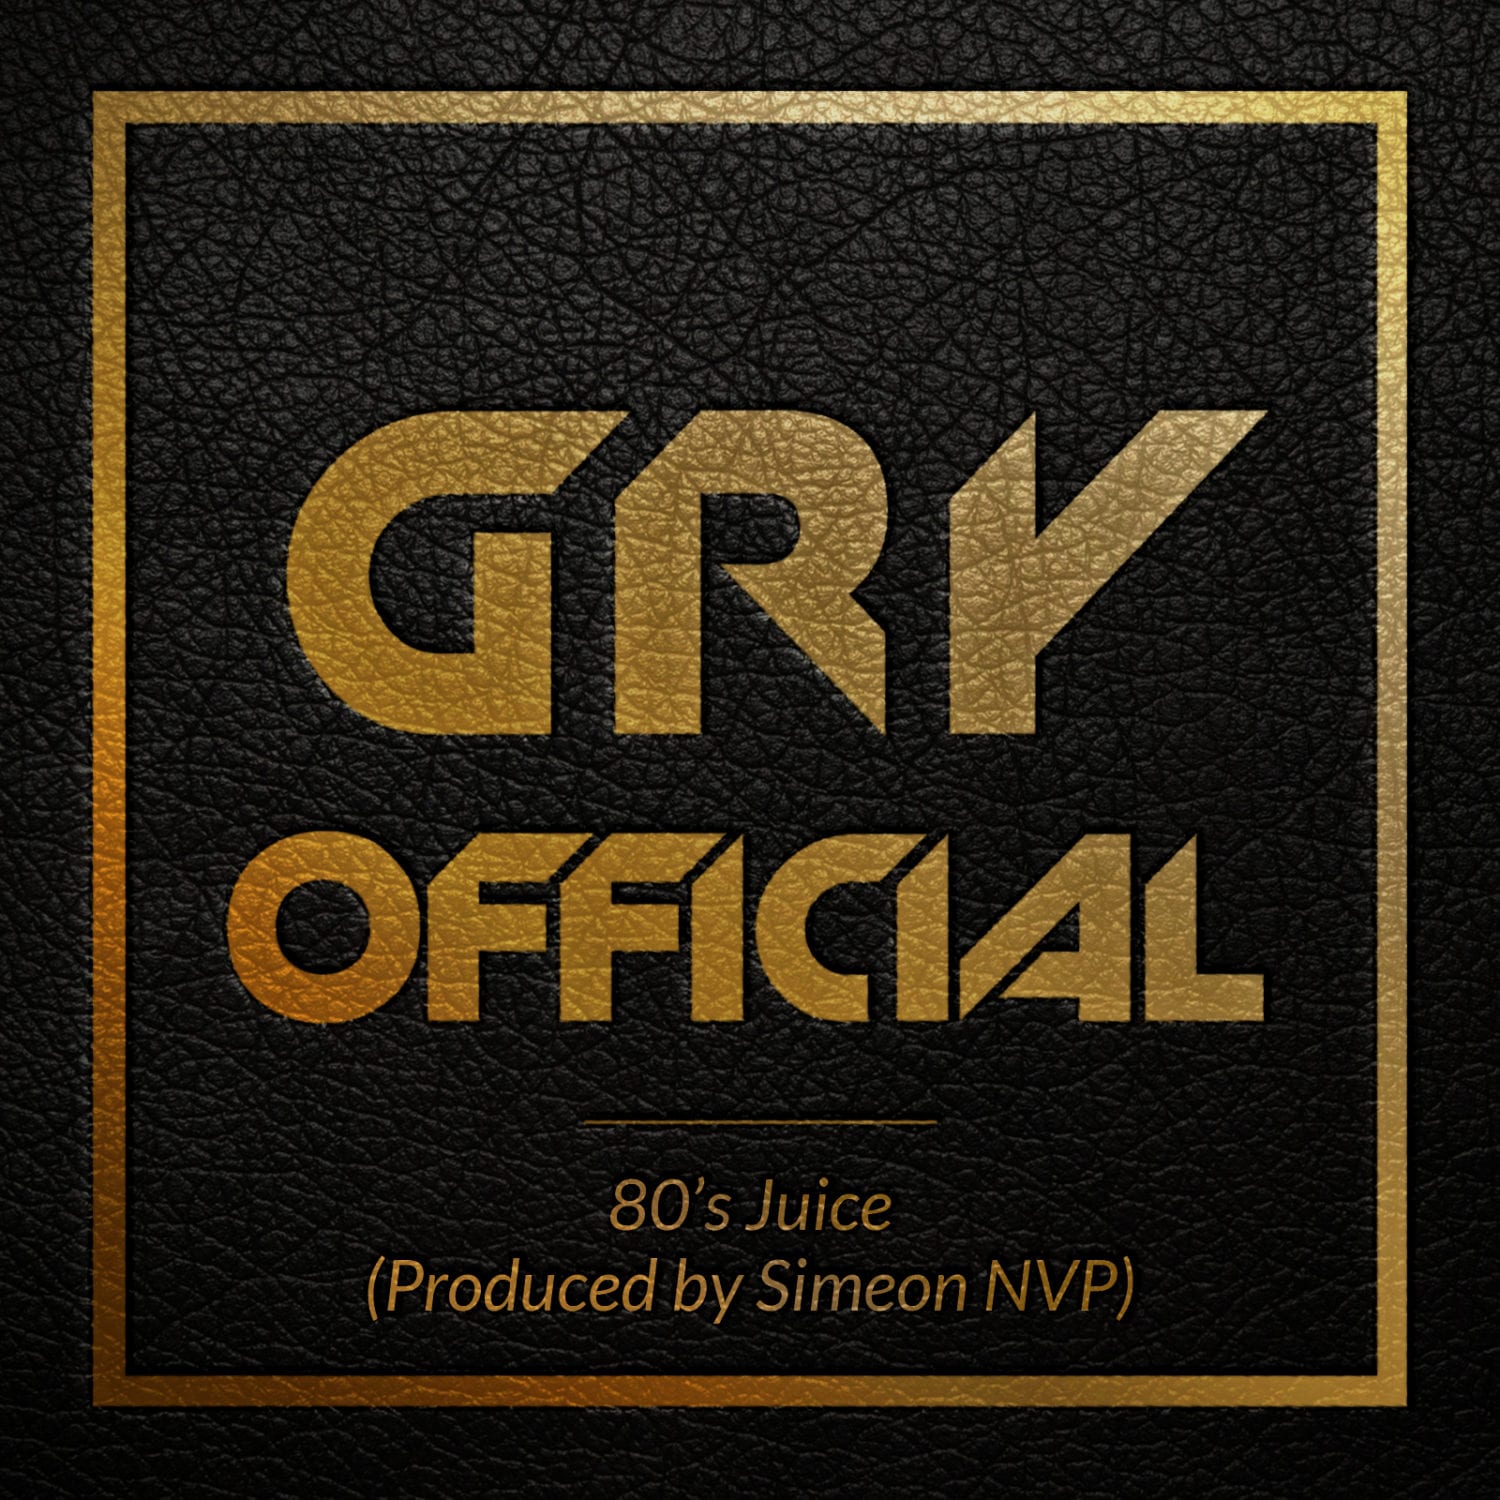 London UK Artist Gry Official Drops New Single - "80's Juice"